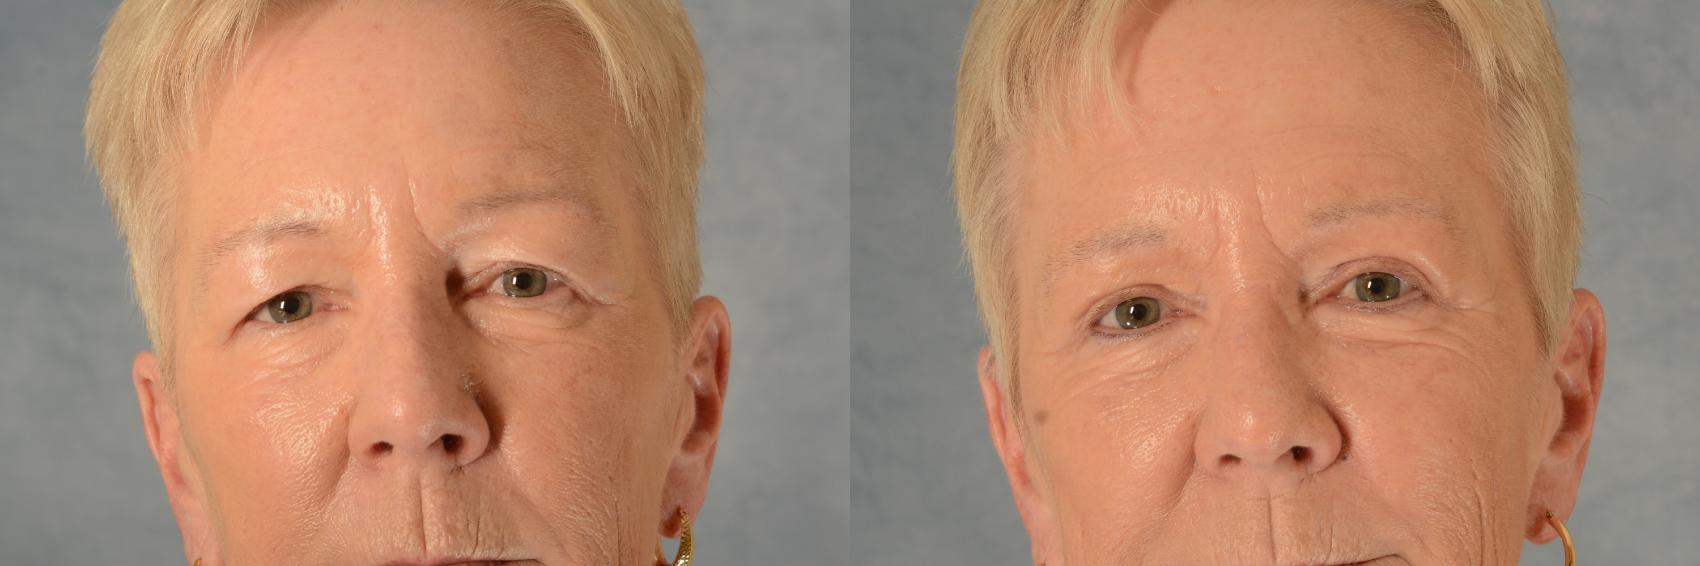 Before & After Eyelid Surgery (Blepharoplasty) Case 504 Front View in Tallahassee, FL